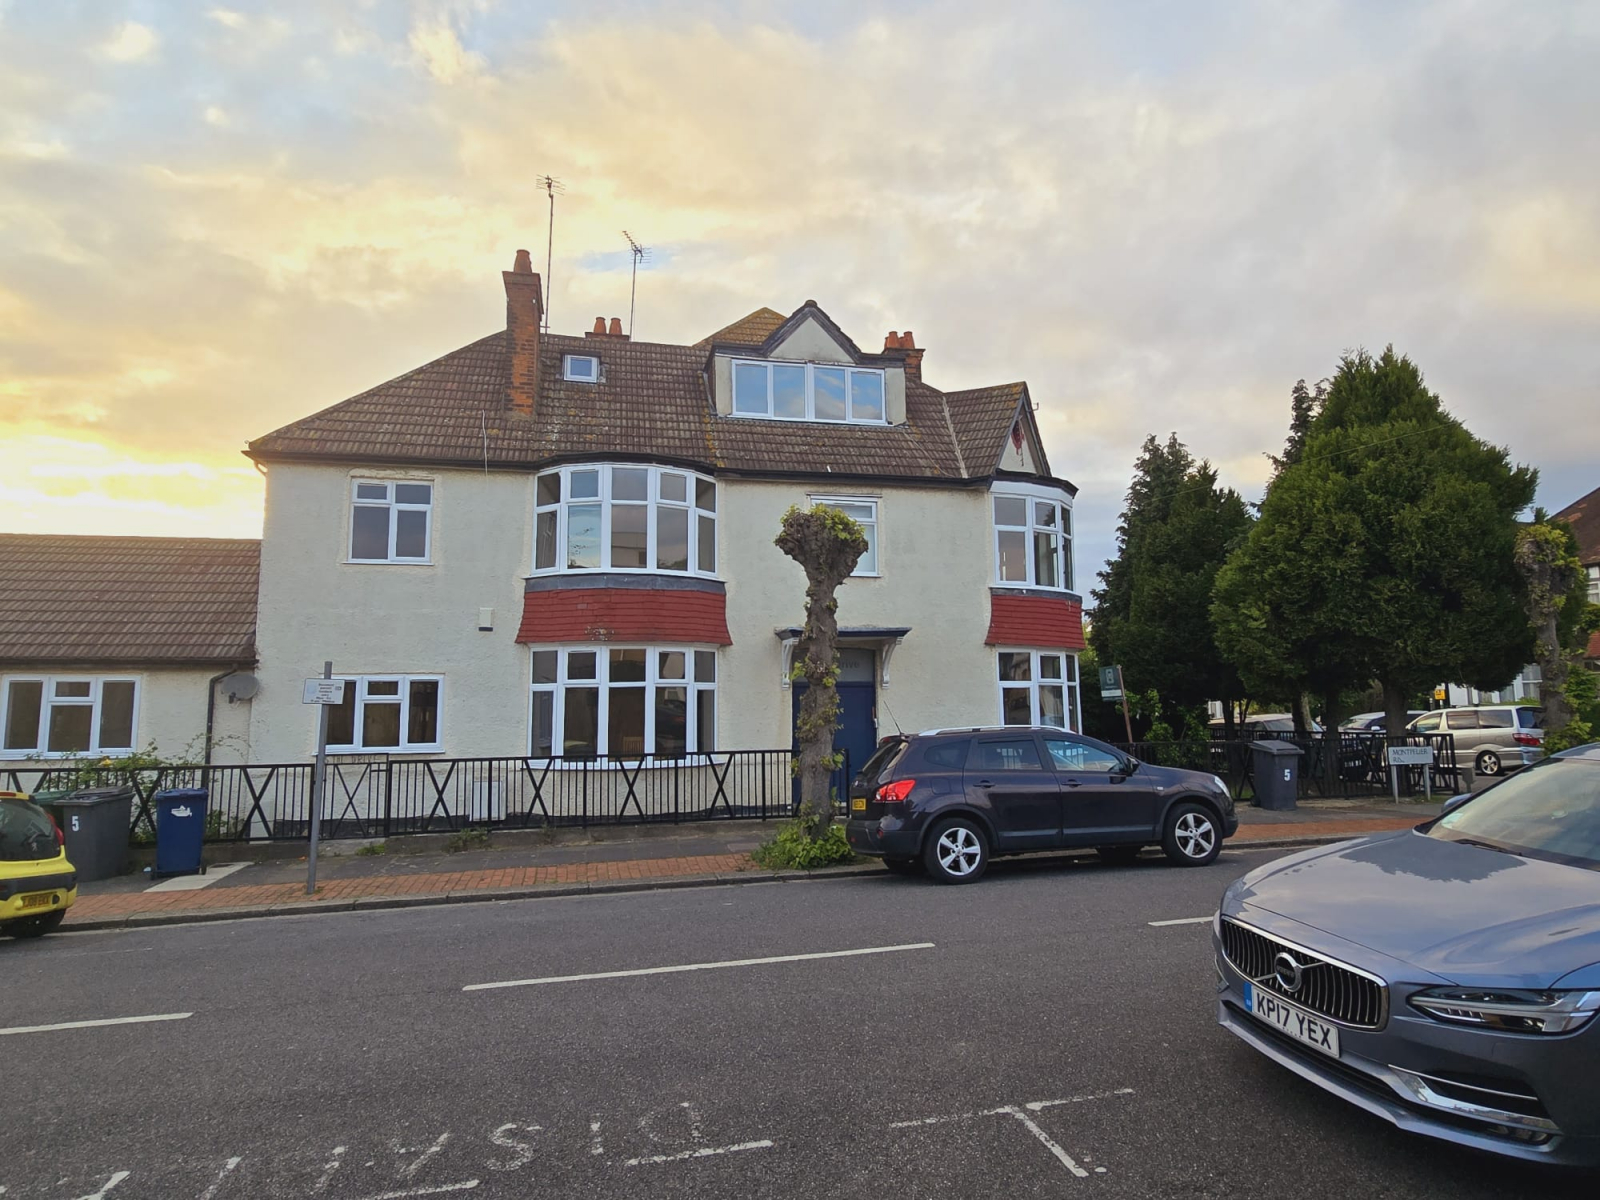 6 bed Semi-Detached House for rent in Hendon. From ELI-G Estates ltd